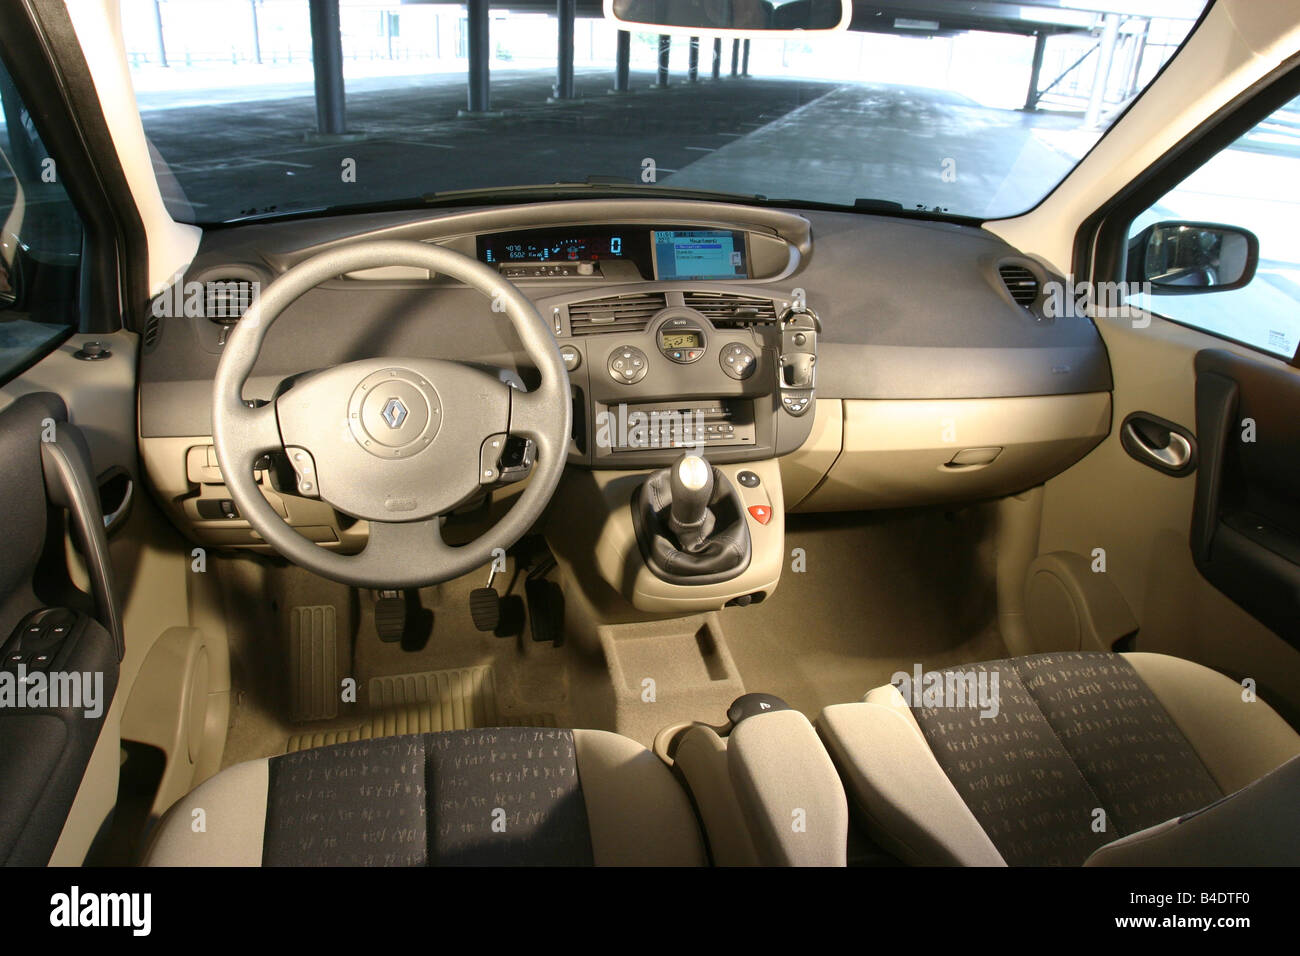 Giotto Dibondon Vlucht Springplank Car, Renault Scénic 1.6 16V Luxe Expr., Van, Limousine, 113 PS, silver  anthracite, interior view, Interior view, Cockpit, techni Stock Photo -  Alamy